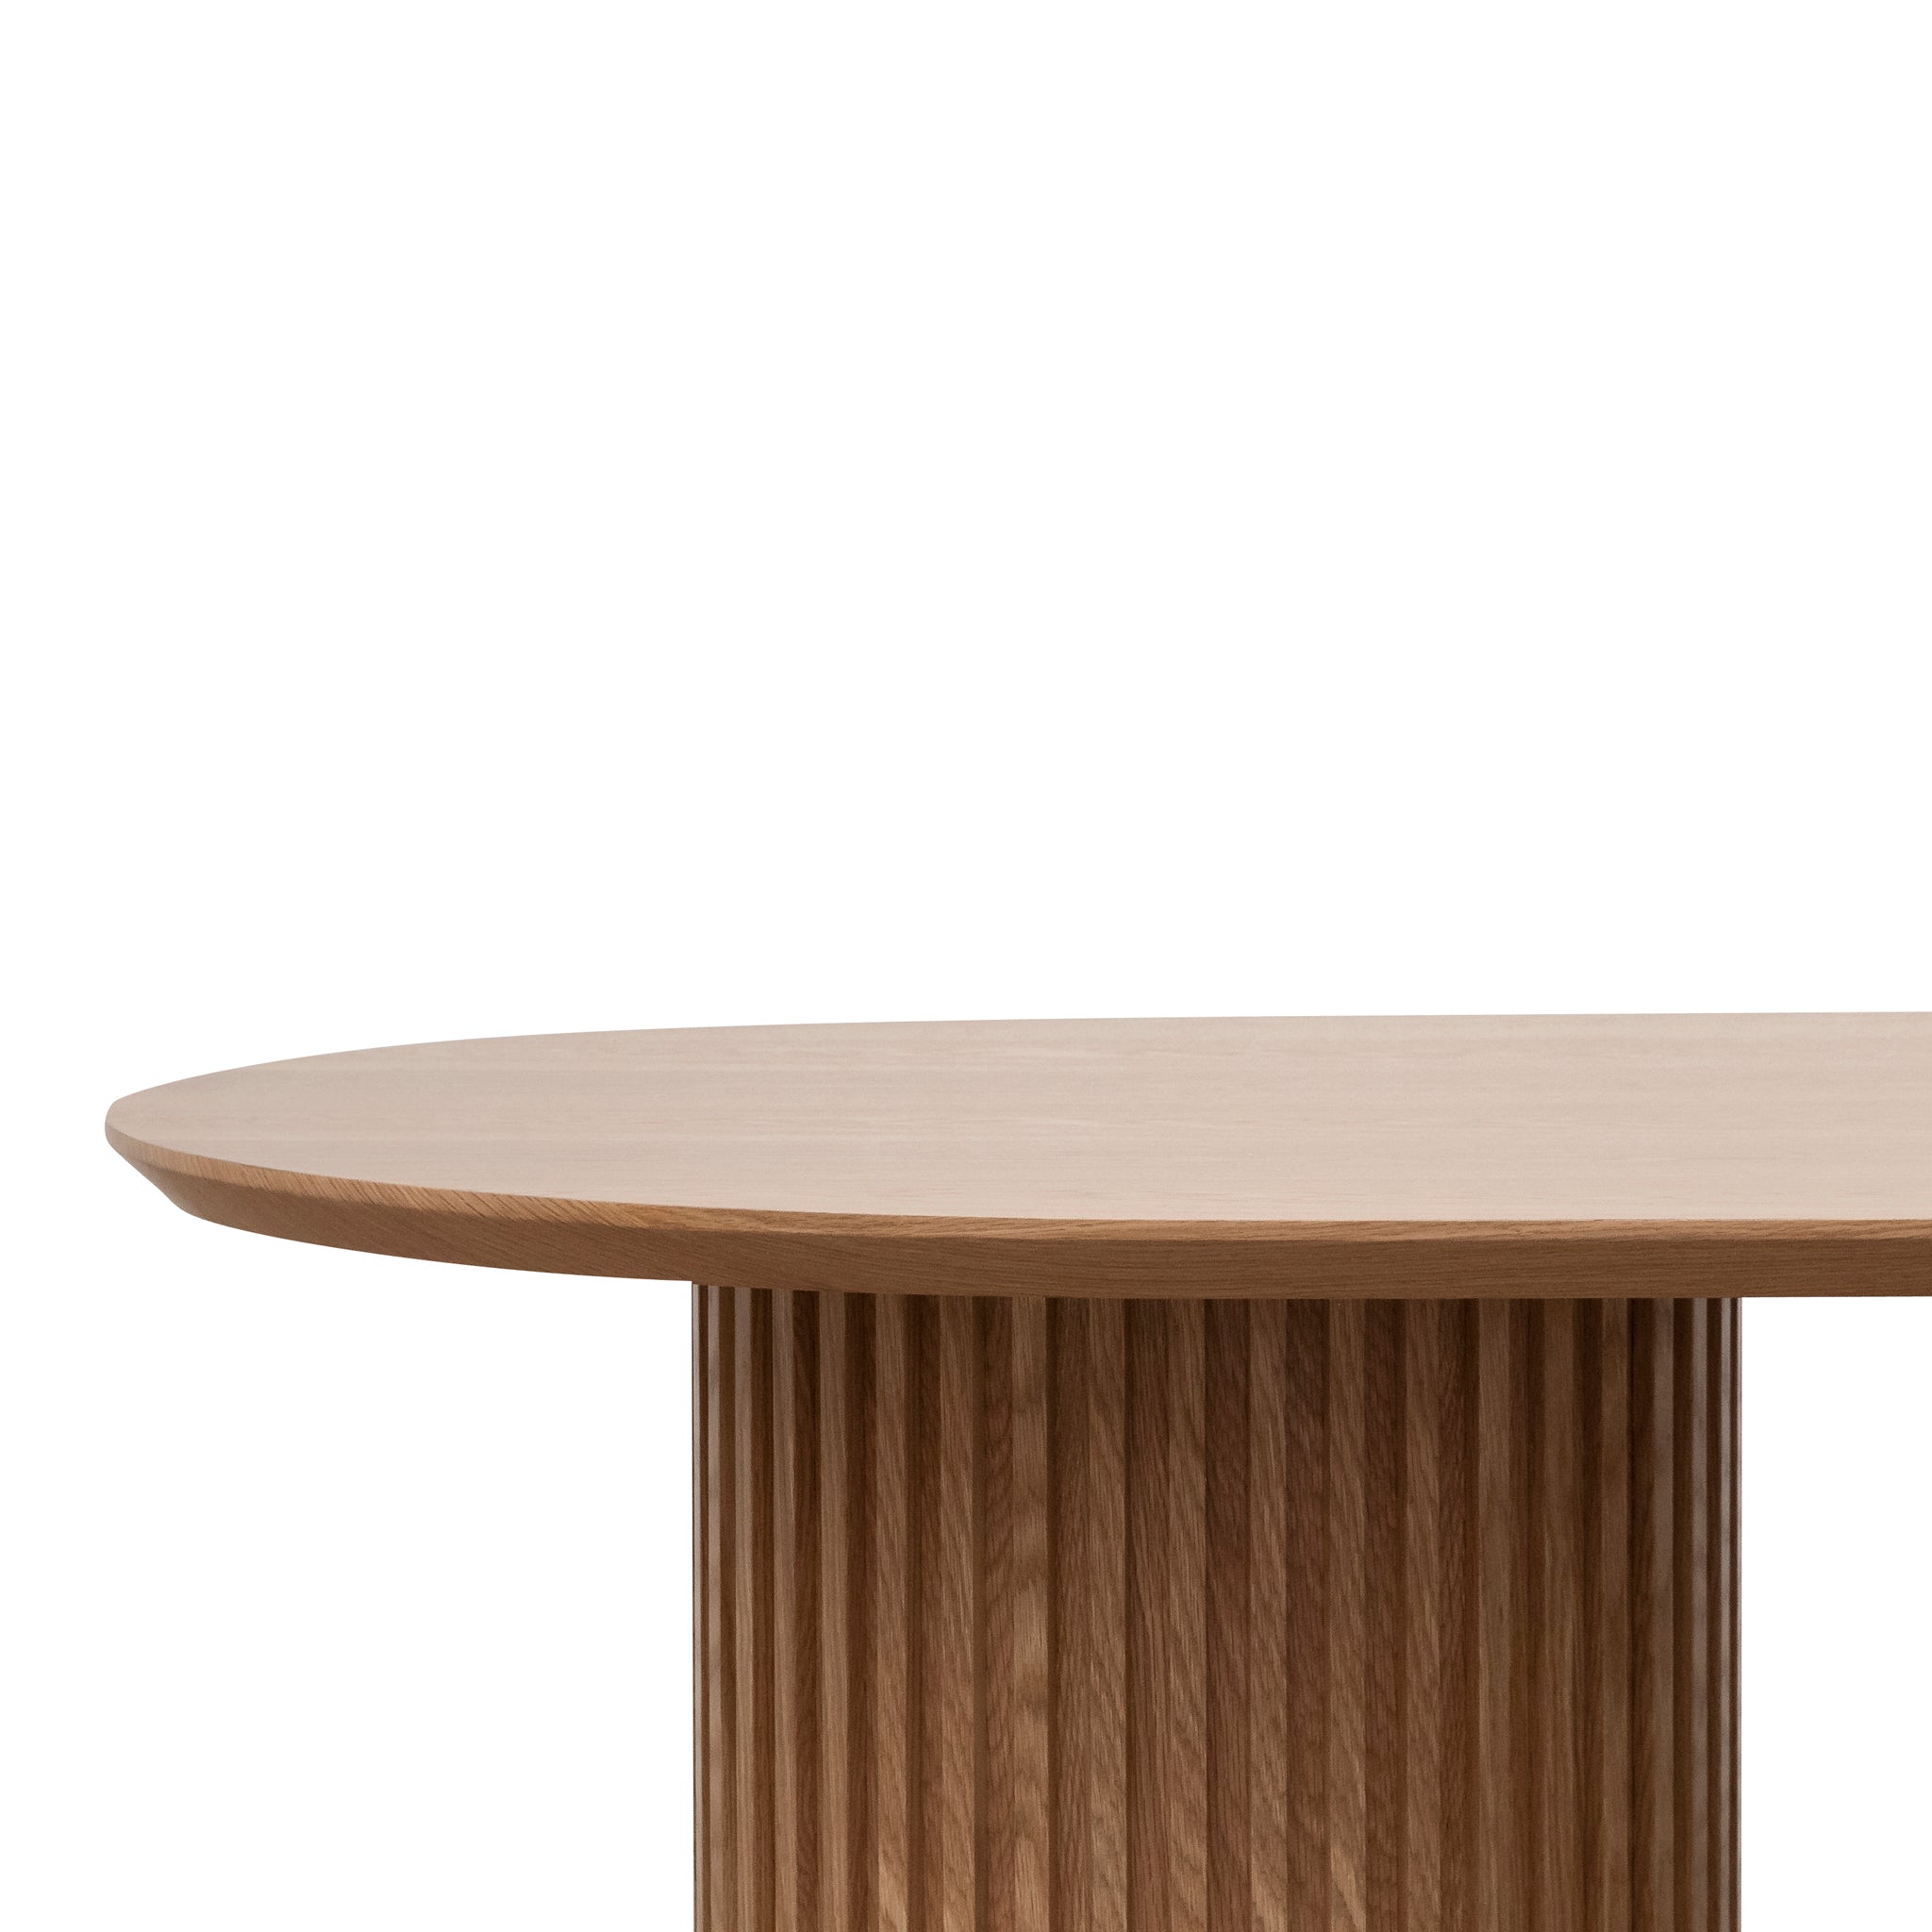 Vics 2.8m Wooden Dining Table - Natural - Dining Tables